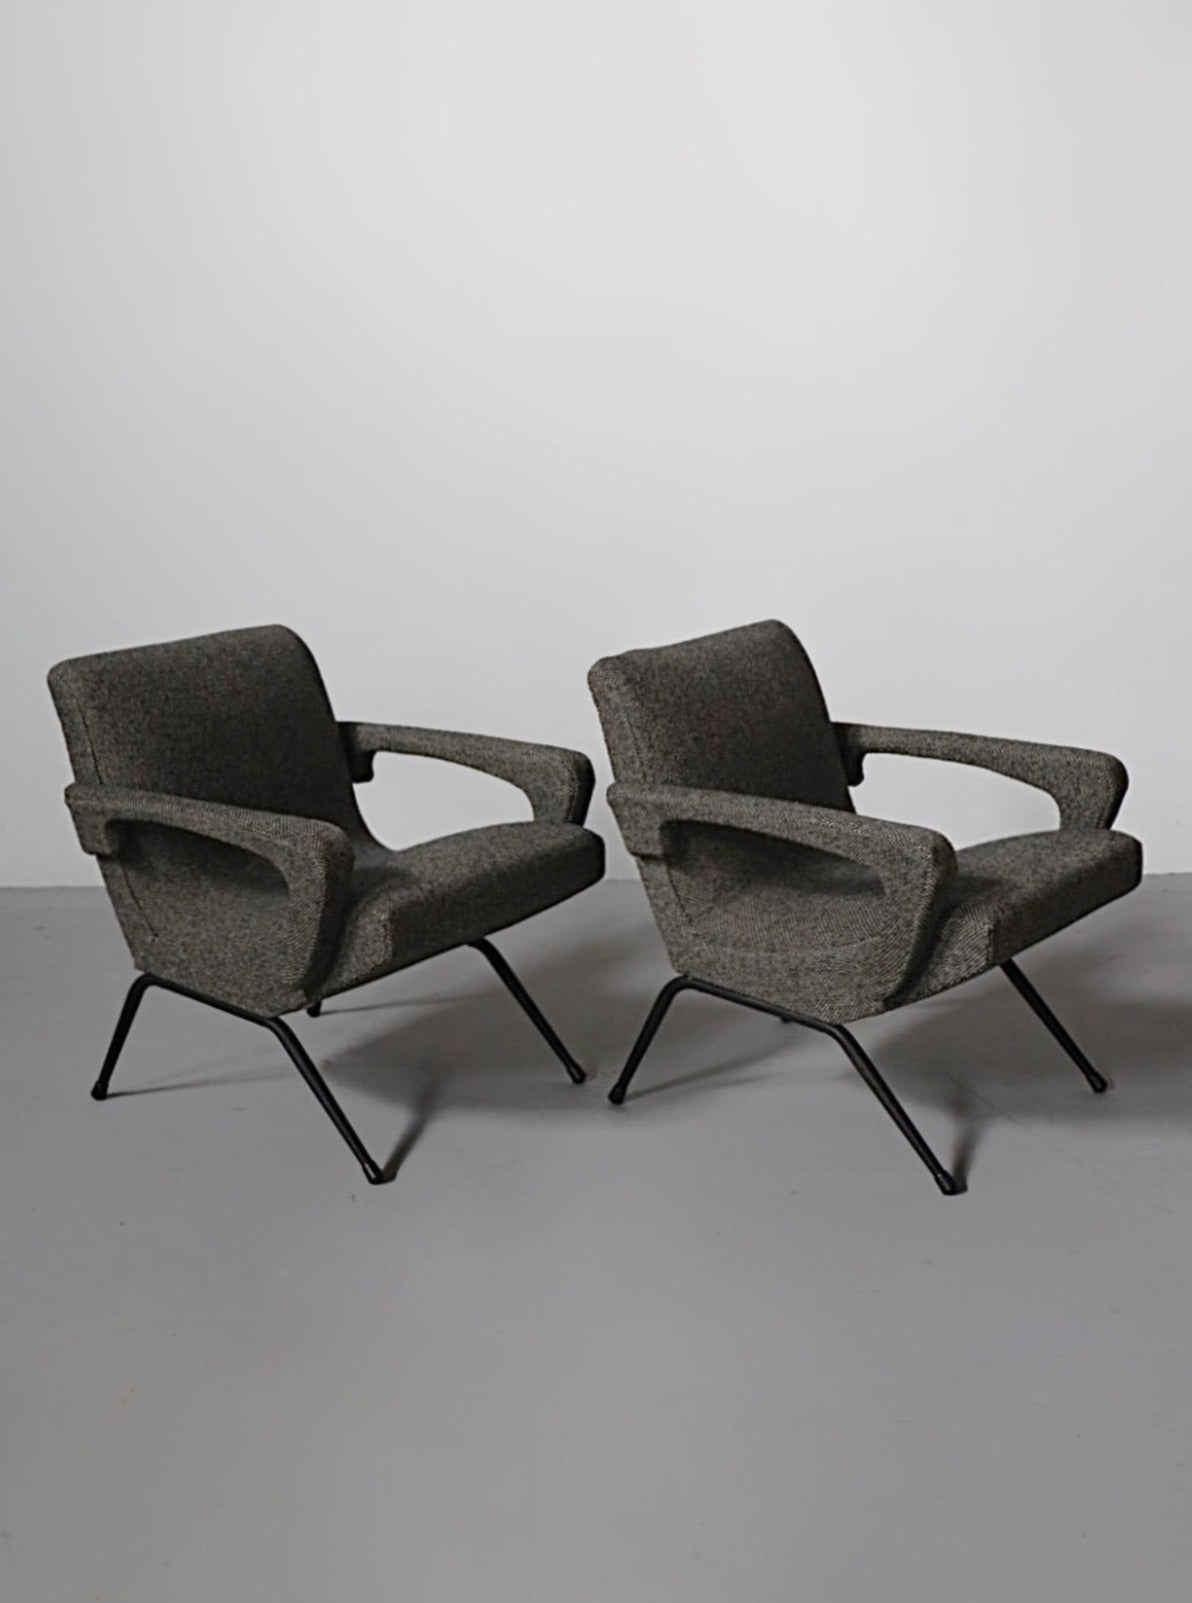 Vintage Armchair by Maurice Cabrol for Malita